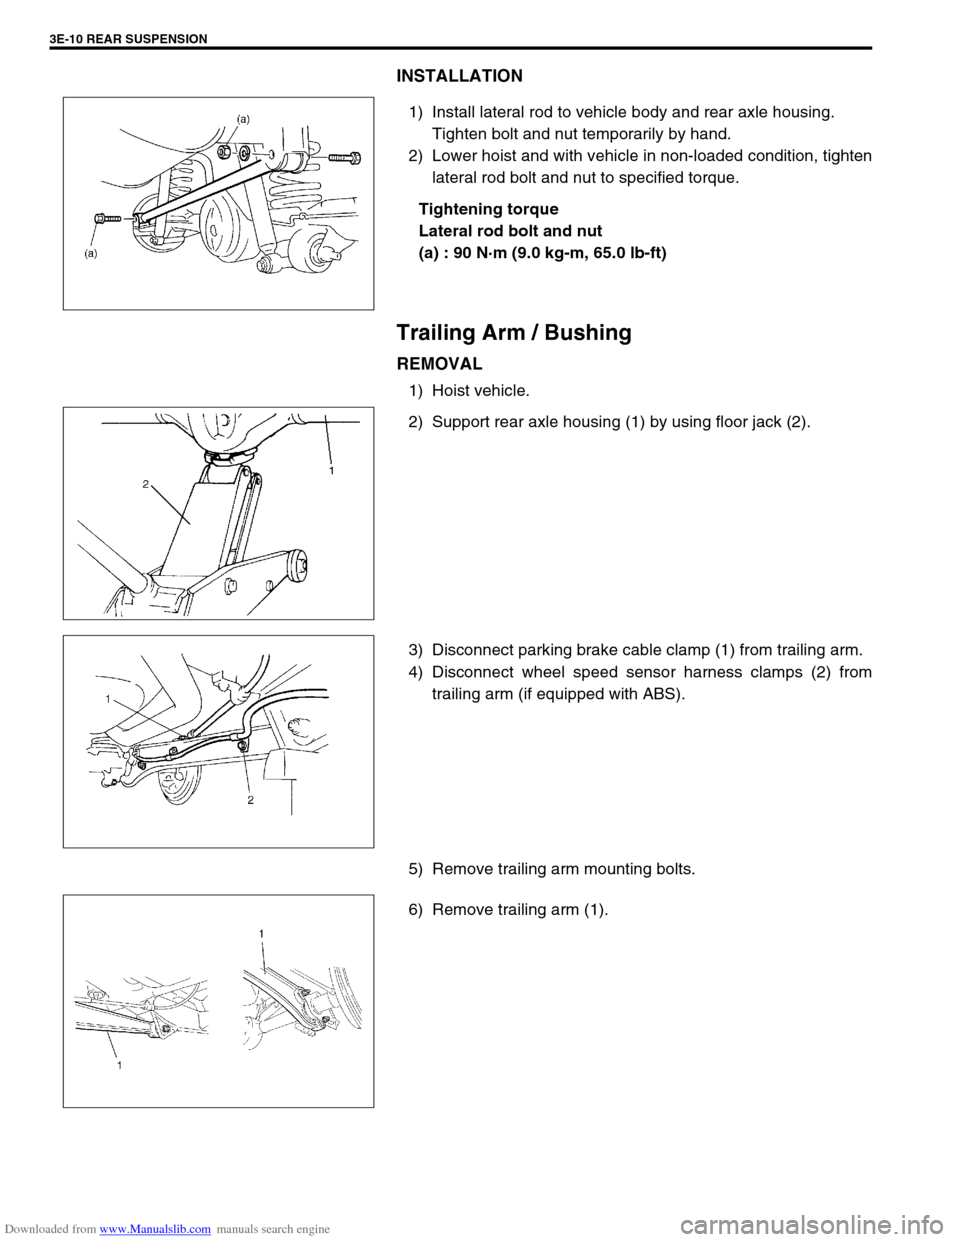 SUZUKI JIMNY 2005 3.G Service Owners Manual Downloaded from www.Manualslib.com manuals search engine 3E-10 REAR SUSPENSION
INSTALLATION
1) Install lateral rod to vehicle body and rear axle housing. 
Tighten bolt and nut temporarily by hand.
2) 